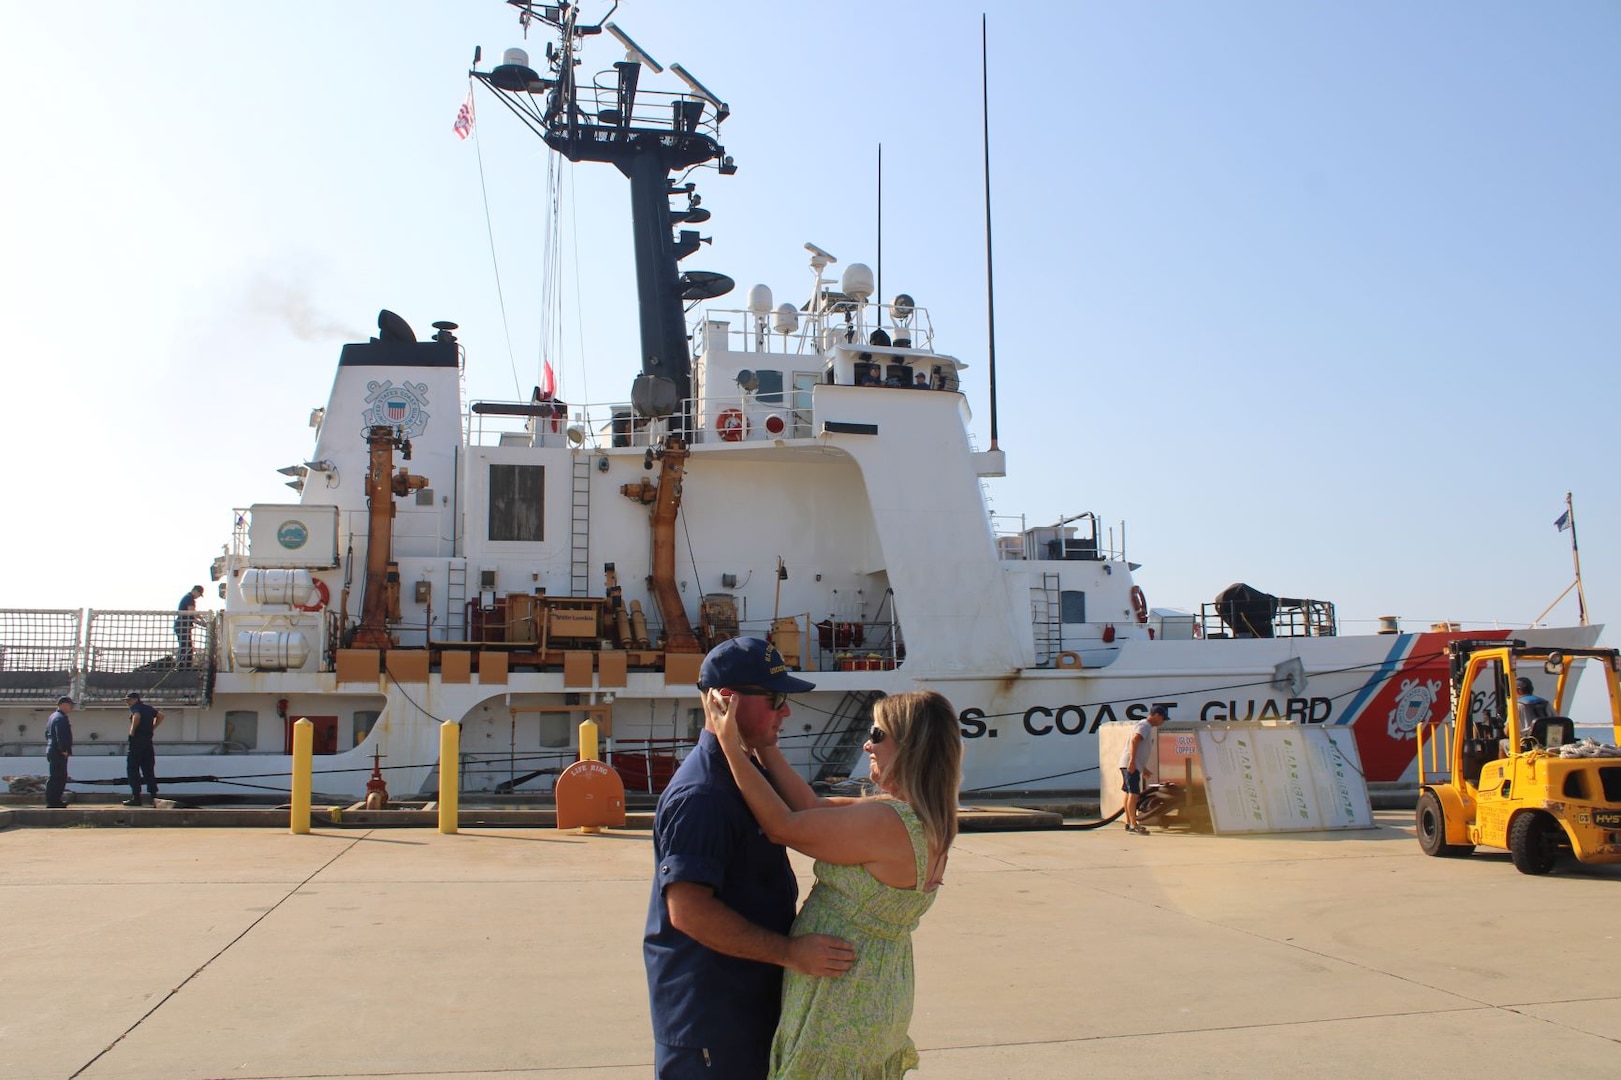 U.S. Coast Chief Petty Officer Wil Wiggins, a crew member assigned to Guard Cutter Dauntless (WMEC 624), greets his spouse at the unit's return to homeport in Pensacola, Florida, Aug. 19, 2023. The Dauntless crew completed a 42-day patrol in the Windward Passage. (U.S. Coast Guard photo by courtesy of Dauntless)